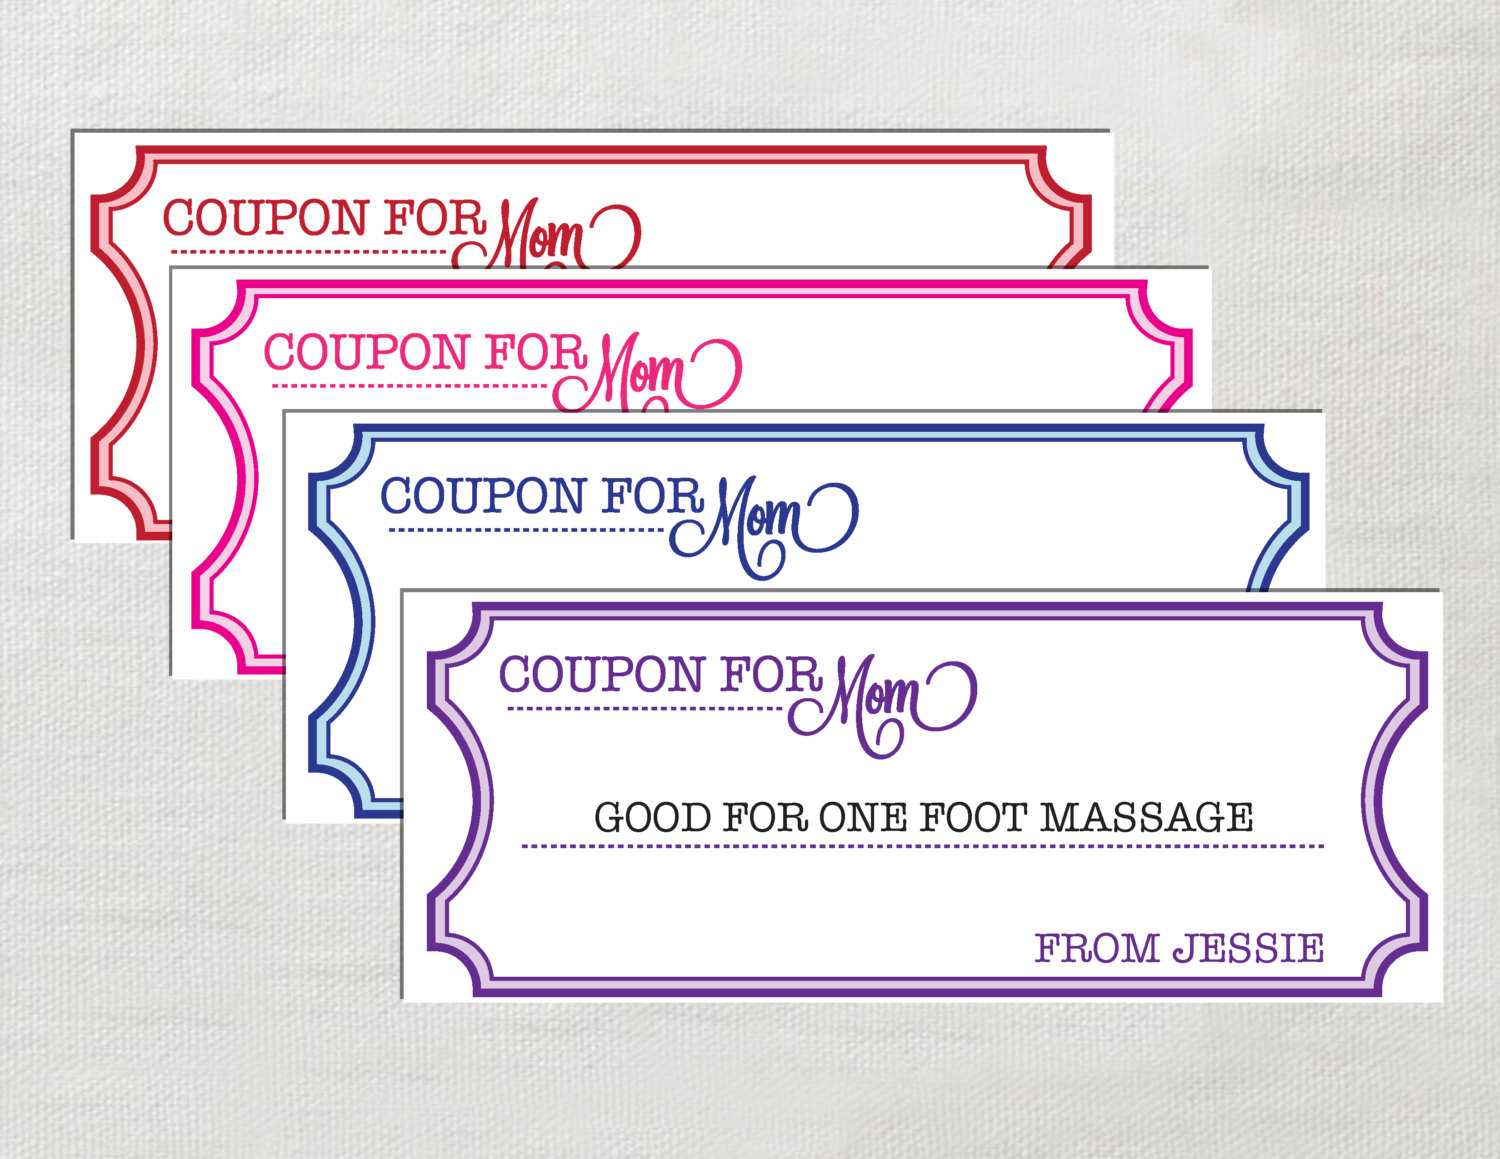 Coupon Template Free Word ] – Doc 585450 Coupon Template For Throughout Love Coupon Template For Word